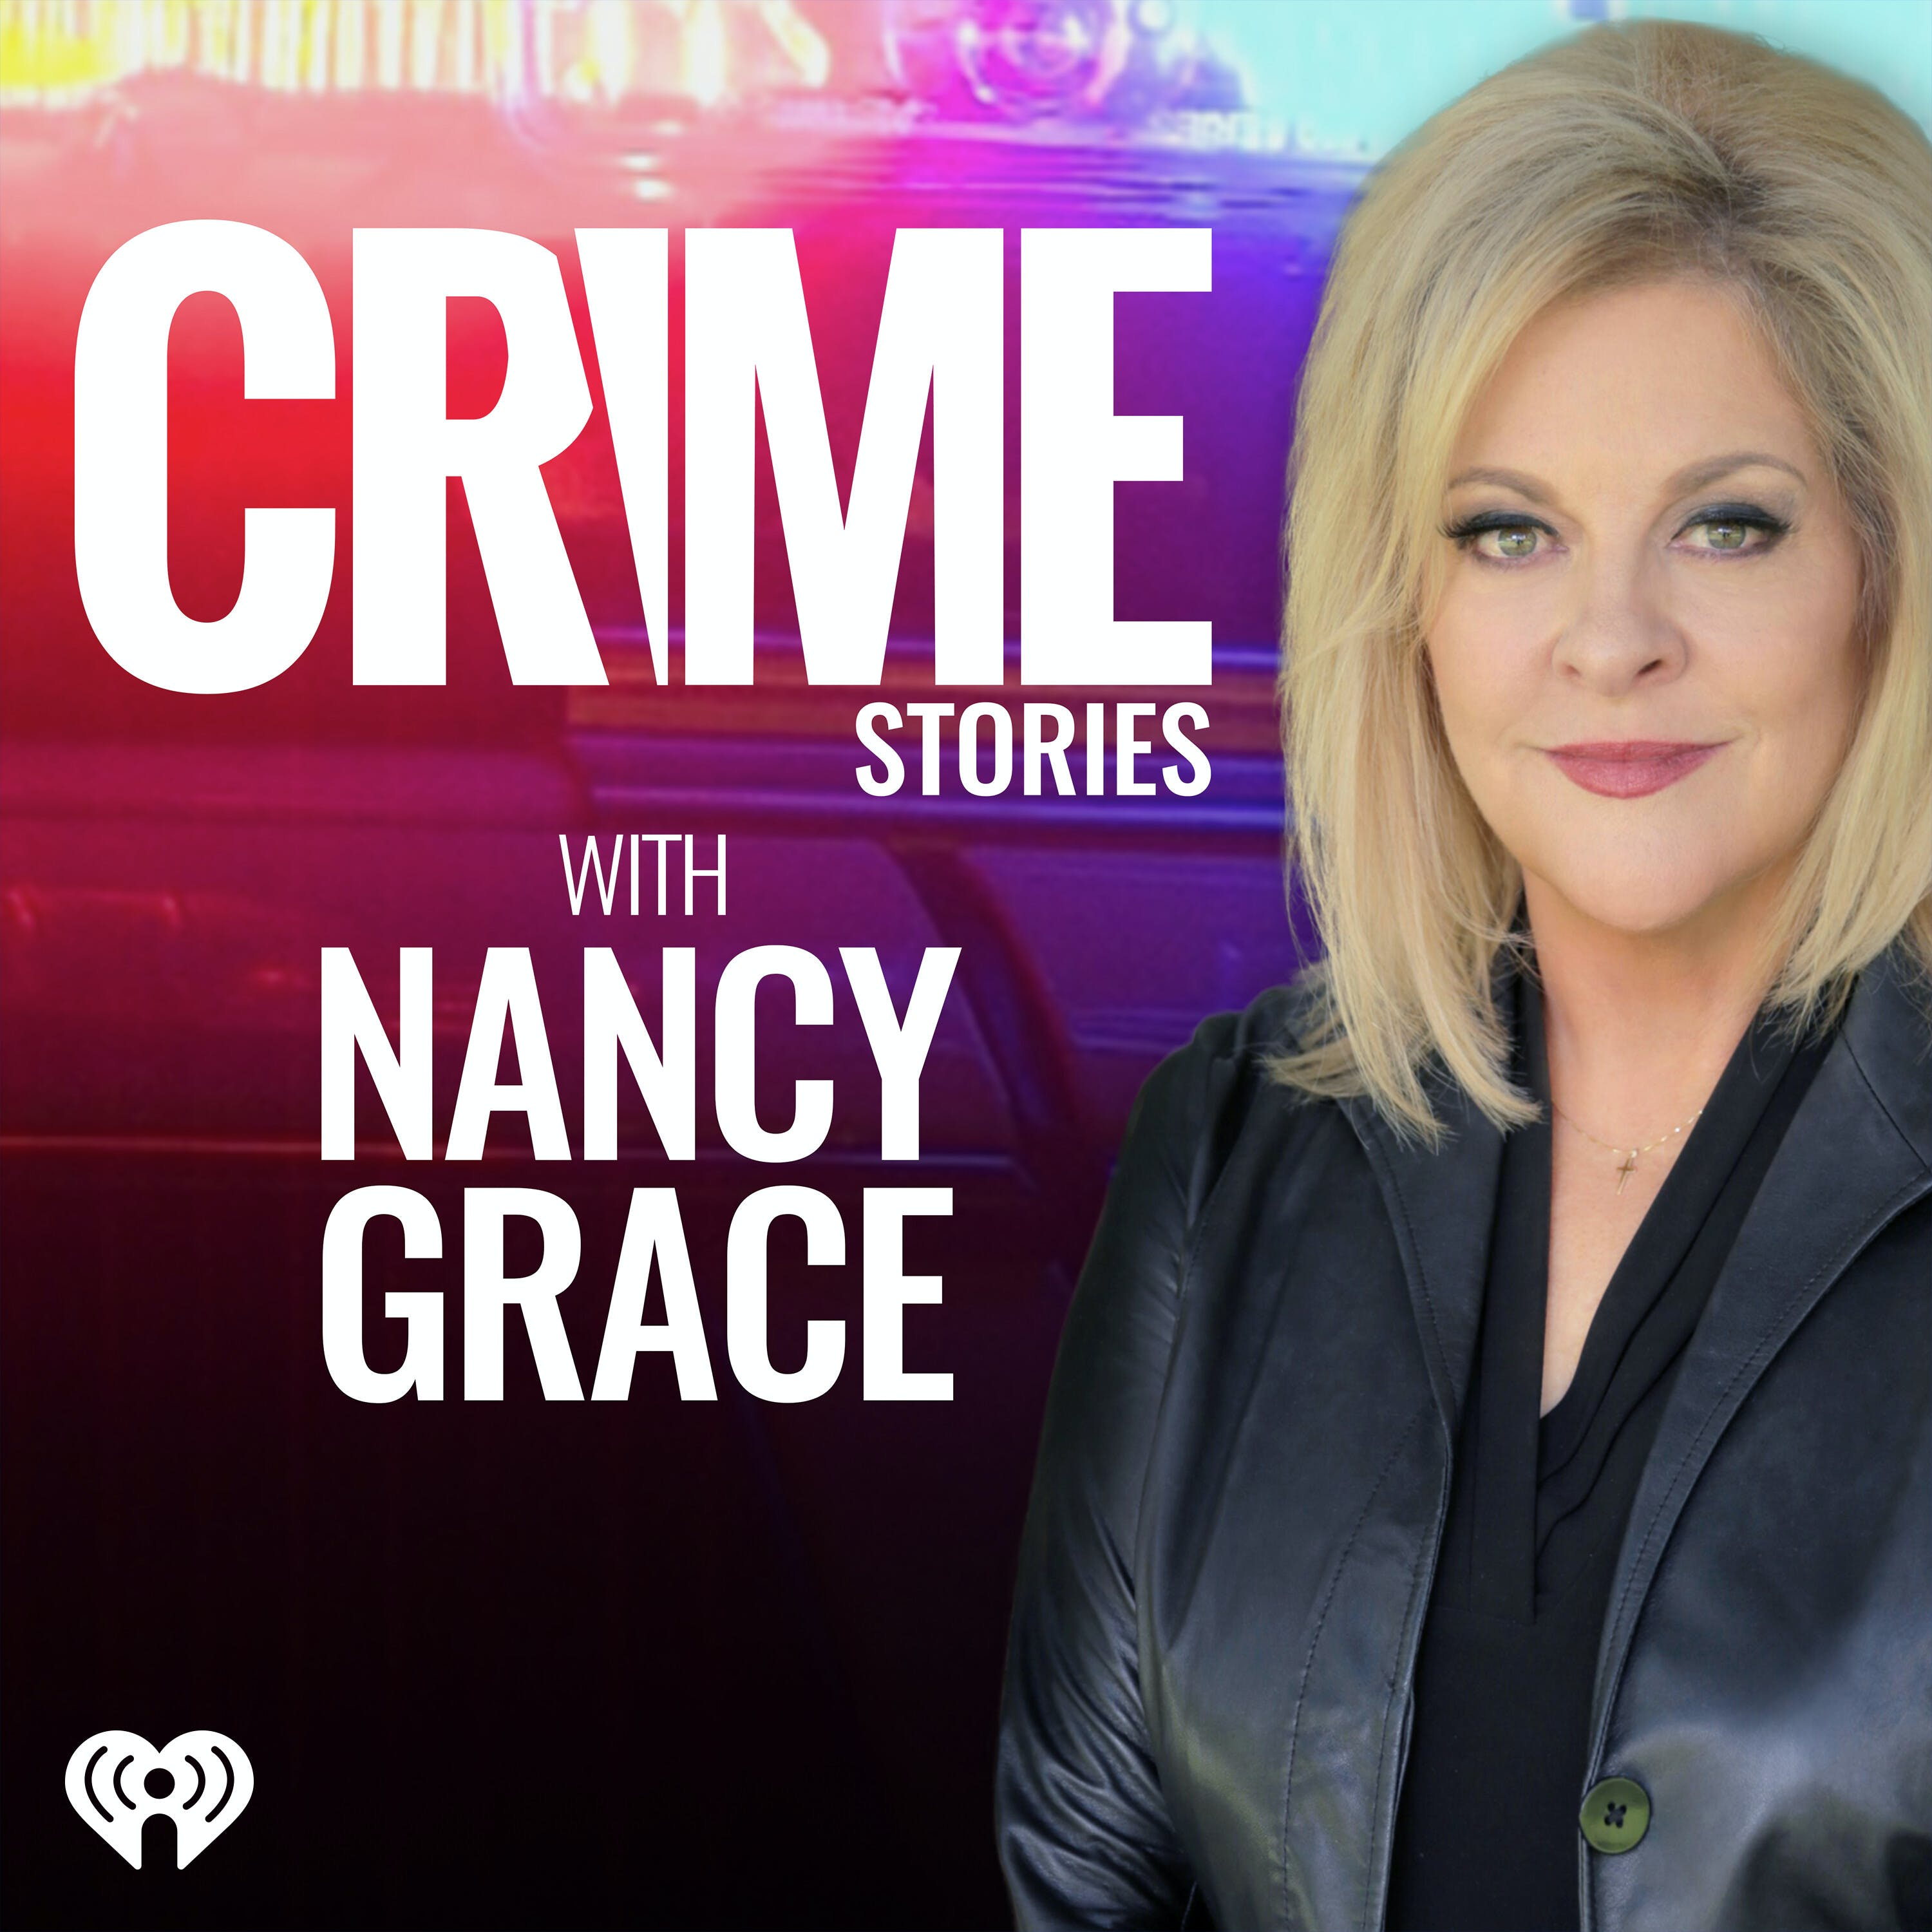 INJUSTICE with NANCY GRACE: Young dad Mike Williams goes duck hunting on Lake Seminole, then vanishes without a trace. Tragic accident or something sinister?